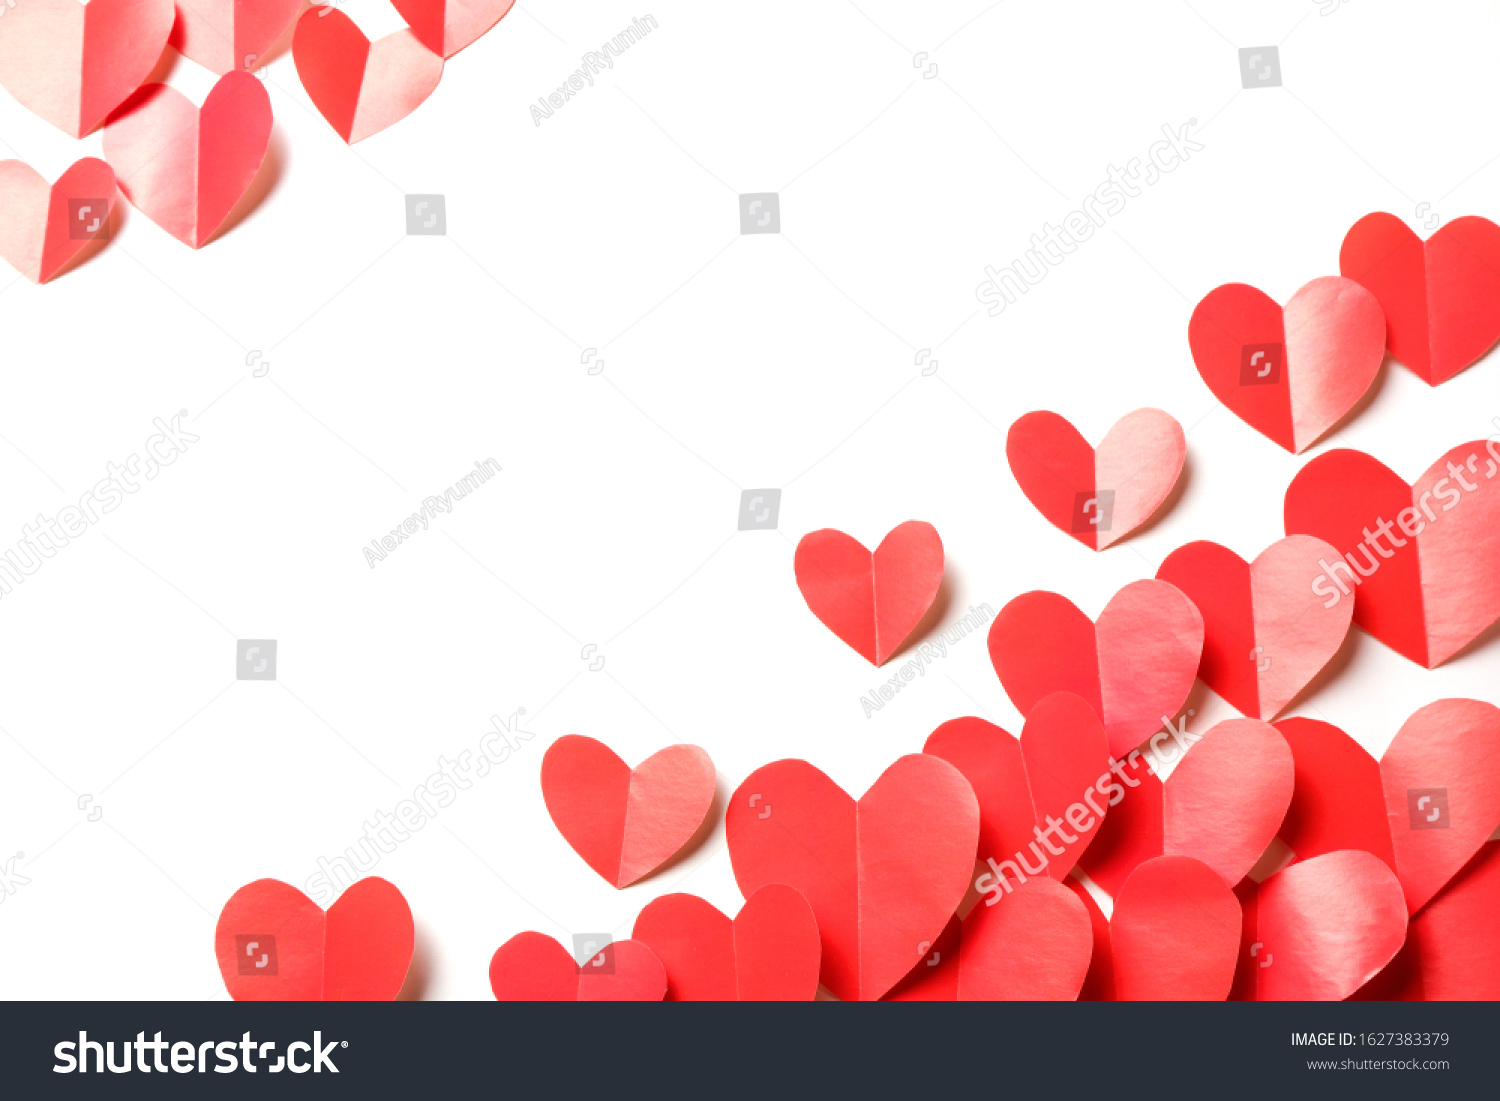 Cut out of red paper hearts on white background isolated. Cute Valentines day, Womans day, love, romantic or wedding composition with copy space for your text  for banner, card, offer, flyer, advertising, invitation.